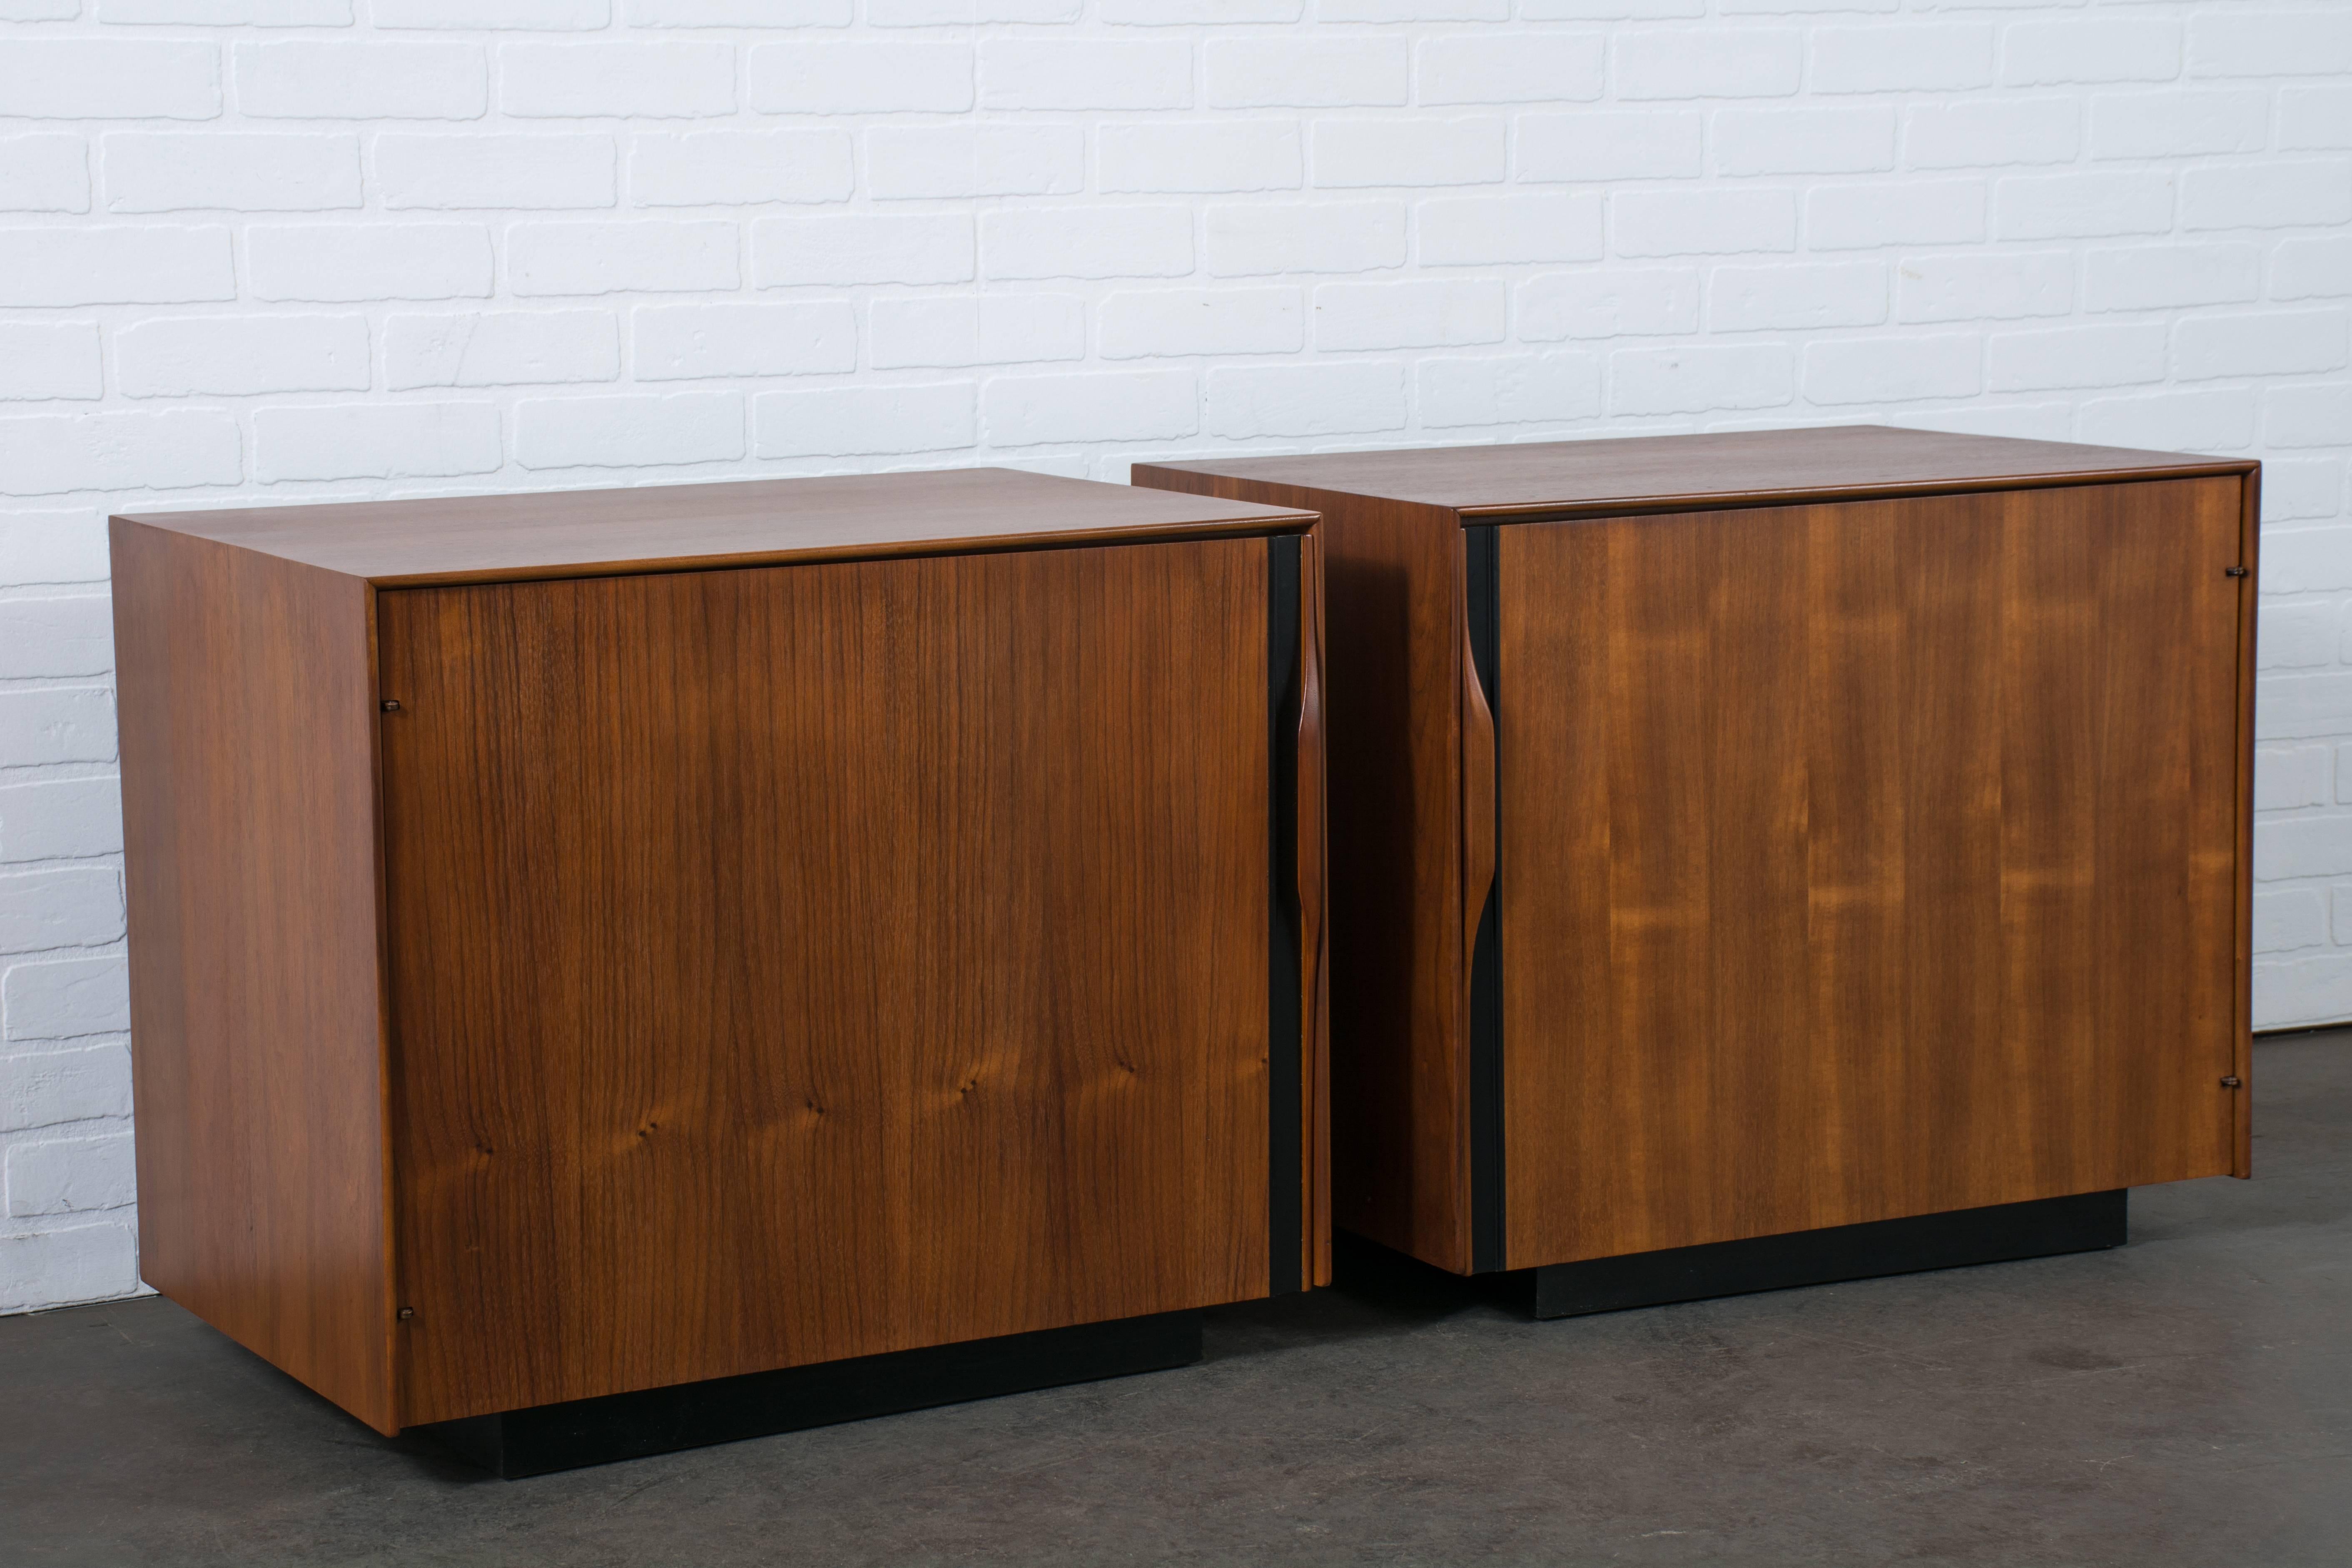 These Mid-Century Modern walnut nightstands were designed by John Kapel for Glenn of California in the 1960s. Each cabinet features plenty of storage with a shelf, magazine holder, and pull-out white laminate tray. The black details contrast